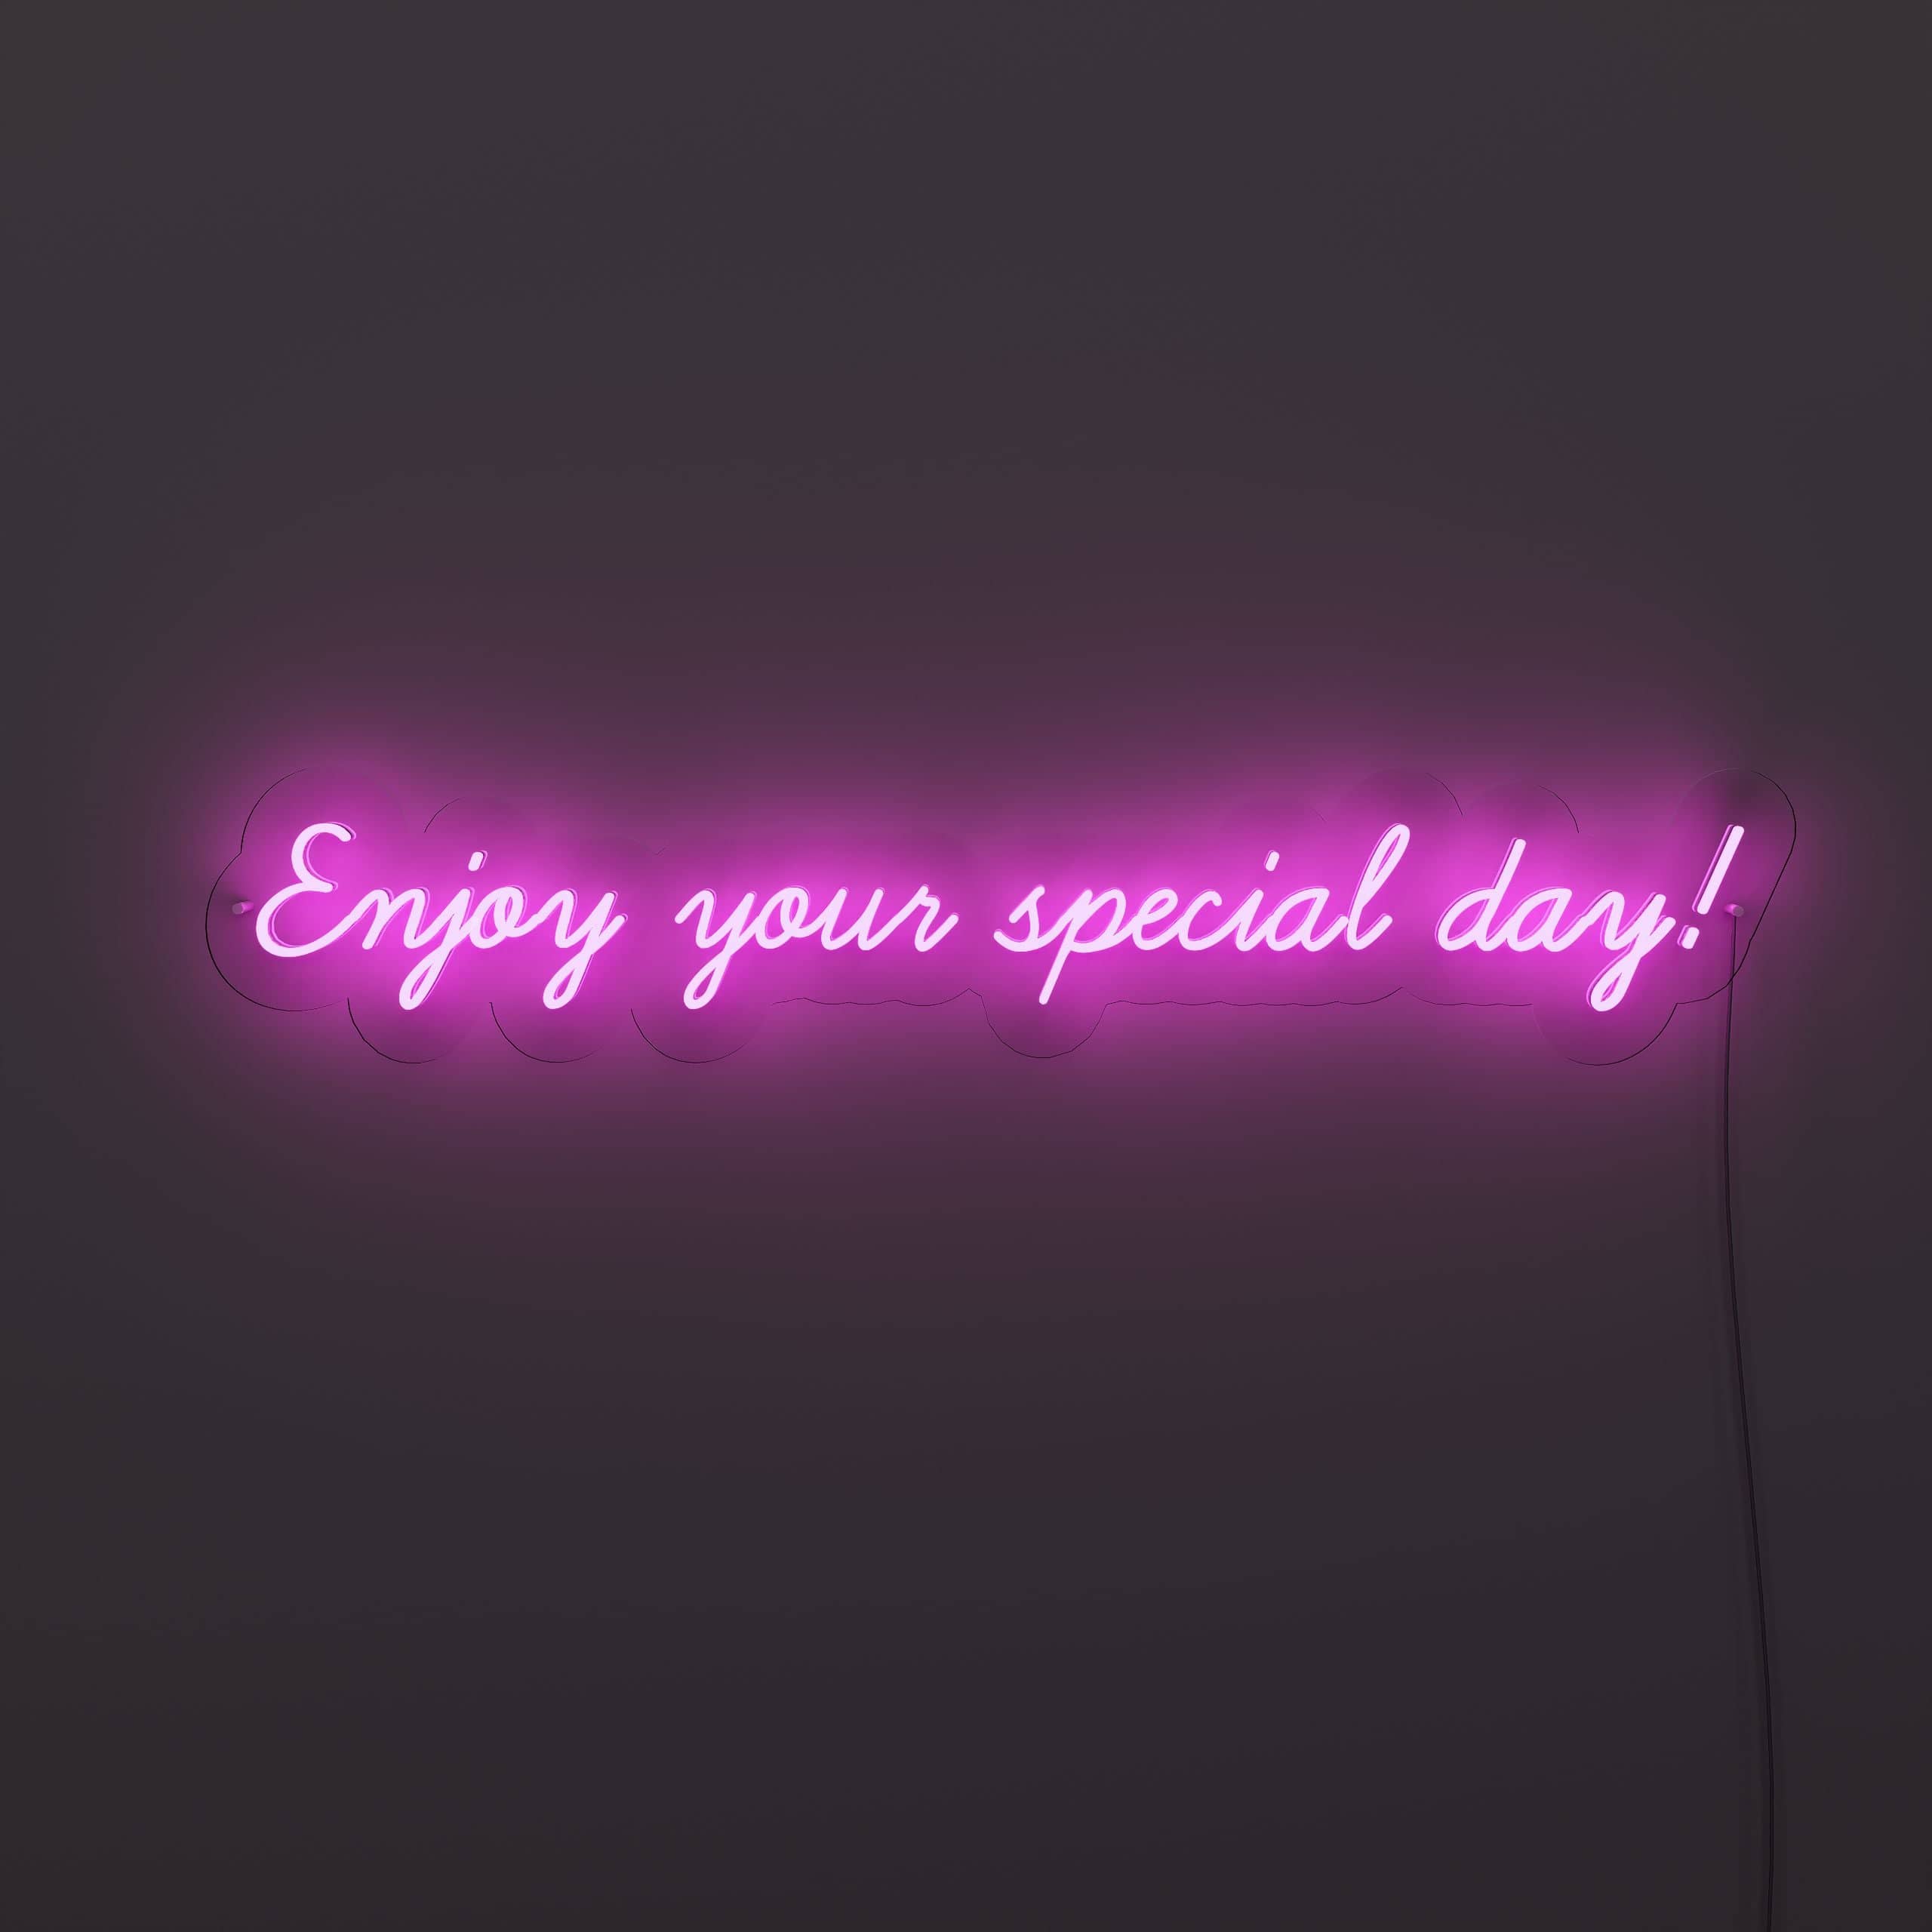 make-beautiful-memories-on-your-special-day!-neon-sign-lite